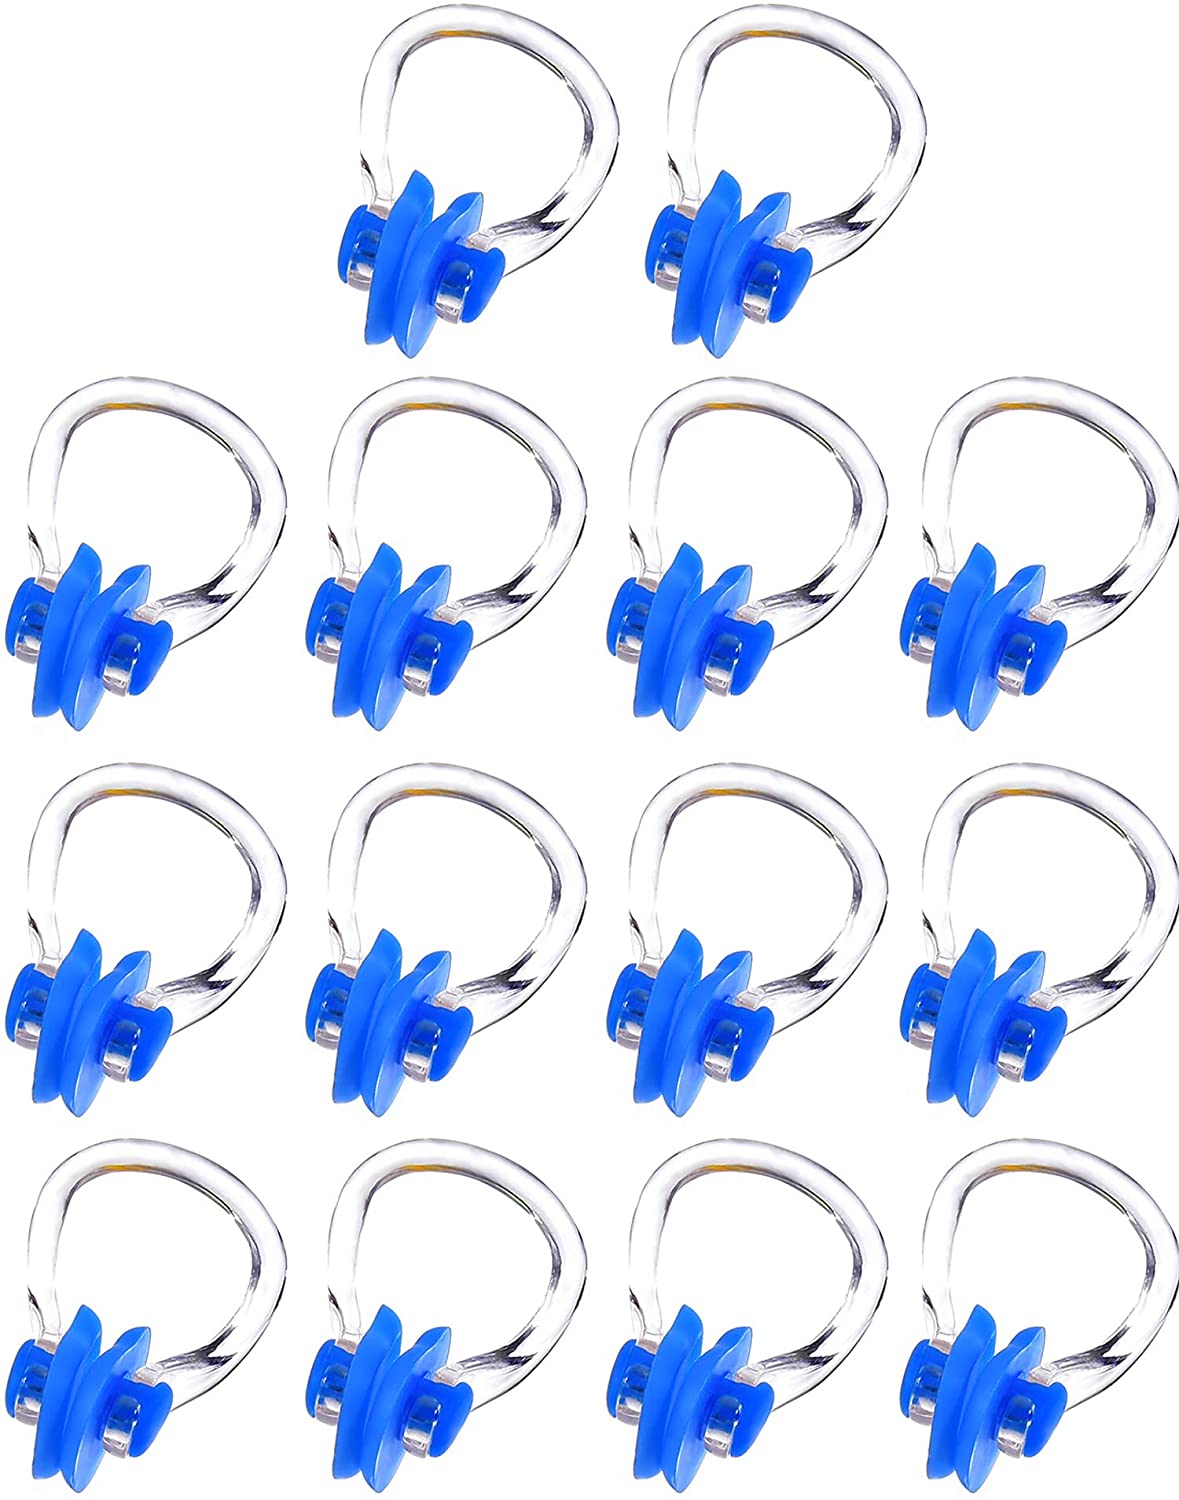 14 Pieces Nose Clip Swimming Nose Plug Swim Nose Guard for Swimming, 14 Colors - image 1 of 5